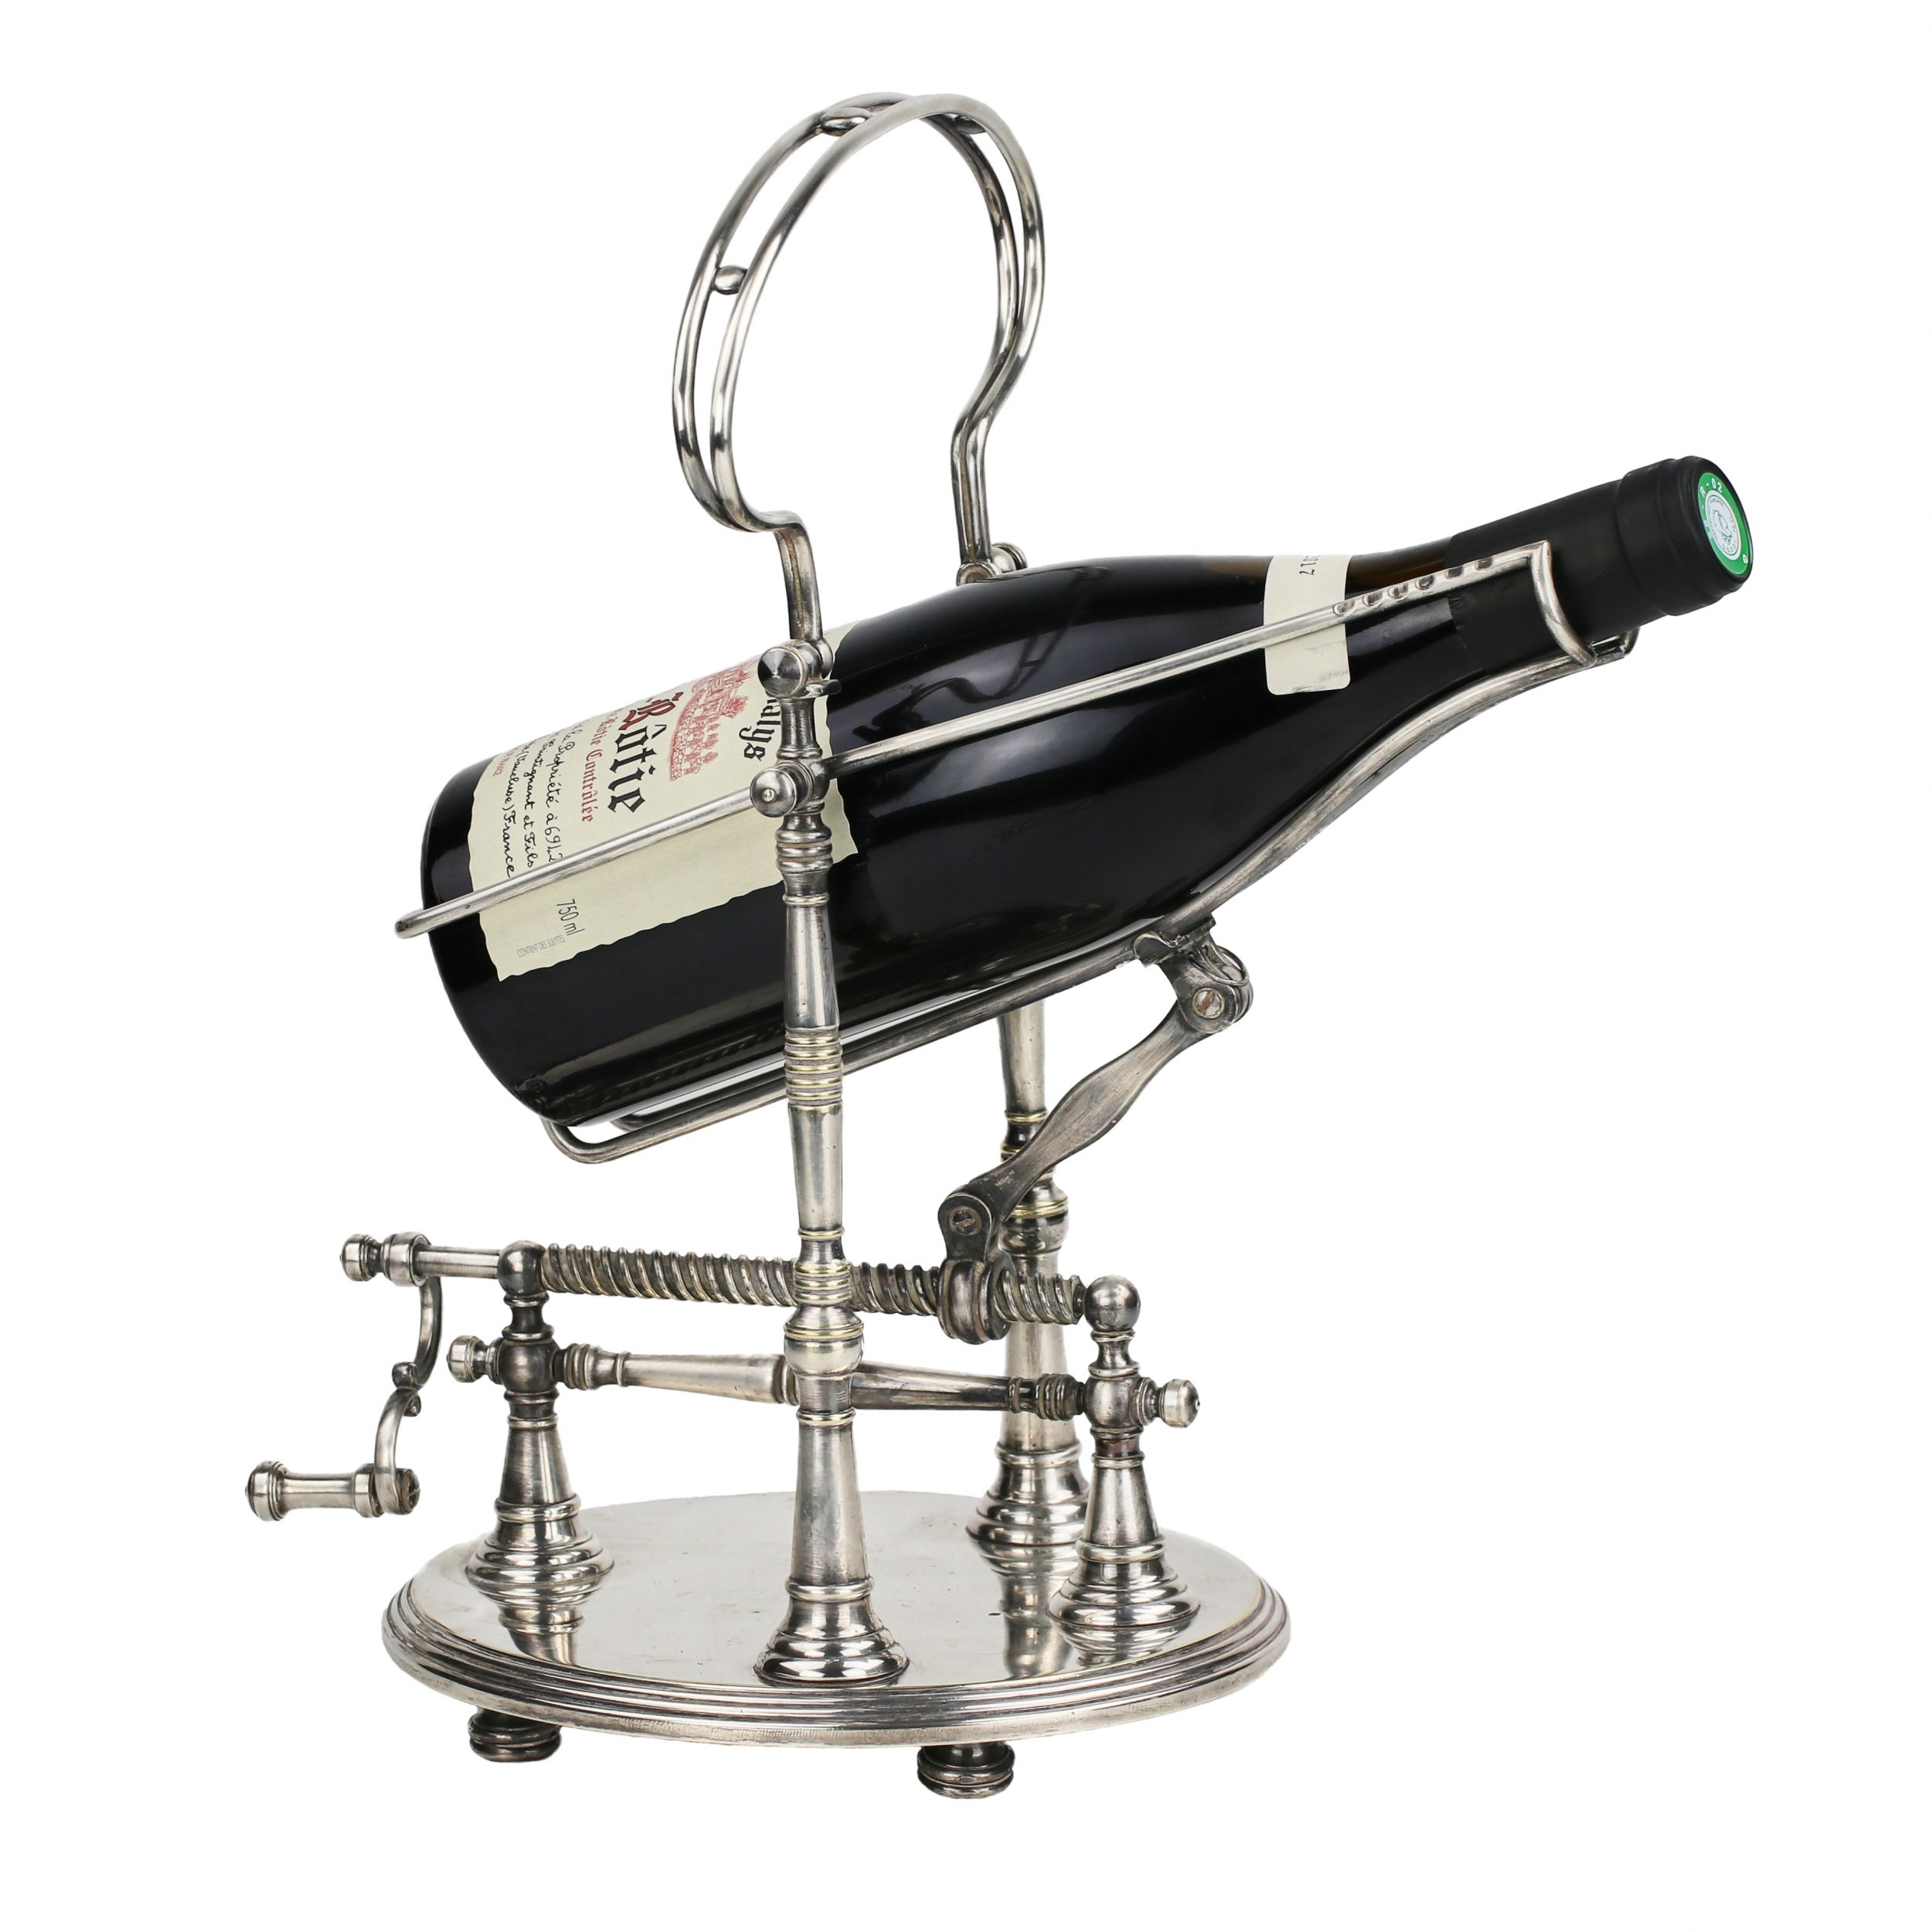 Magnificent-carriage-with-a-gate-mechanism-for-pouring-drinks-Christofle-